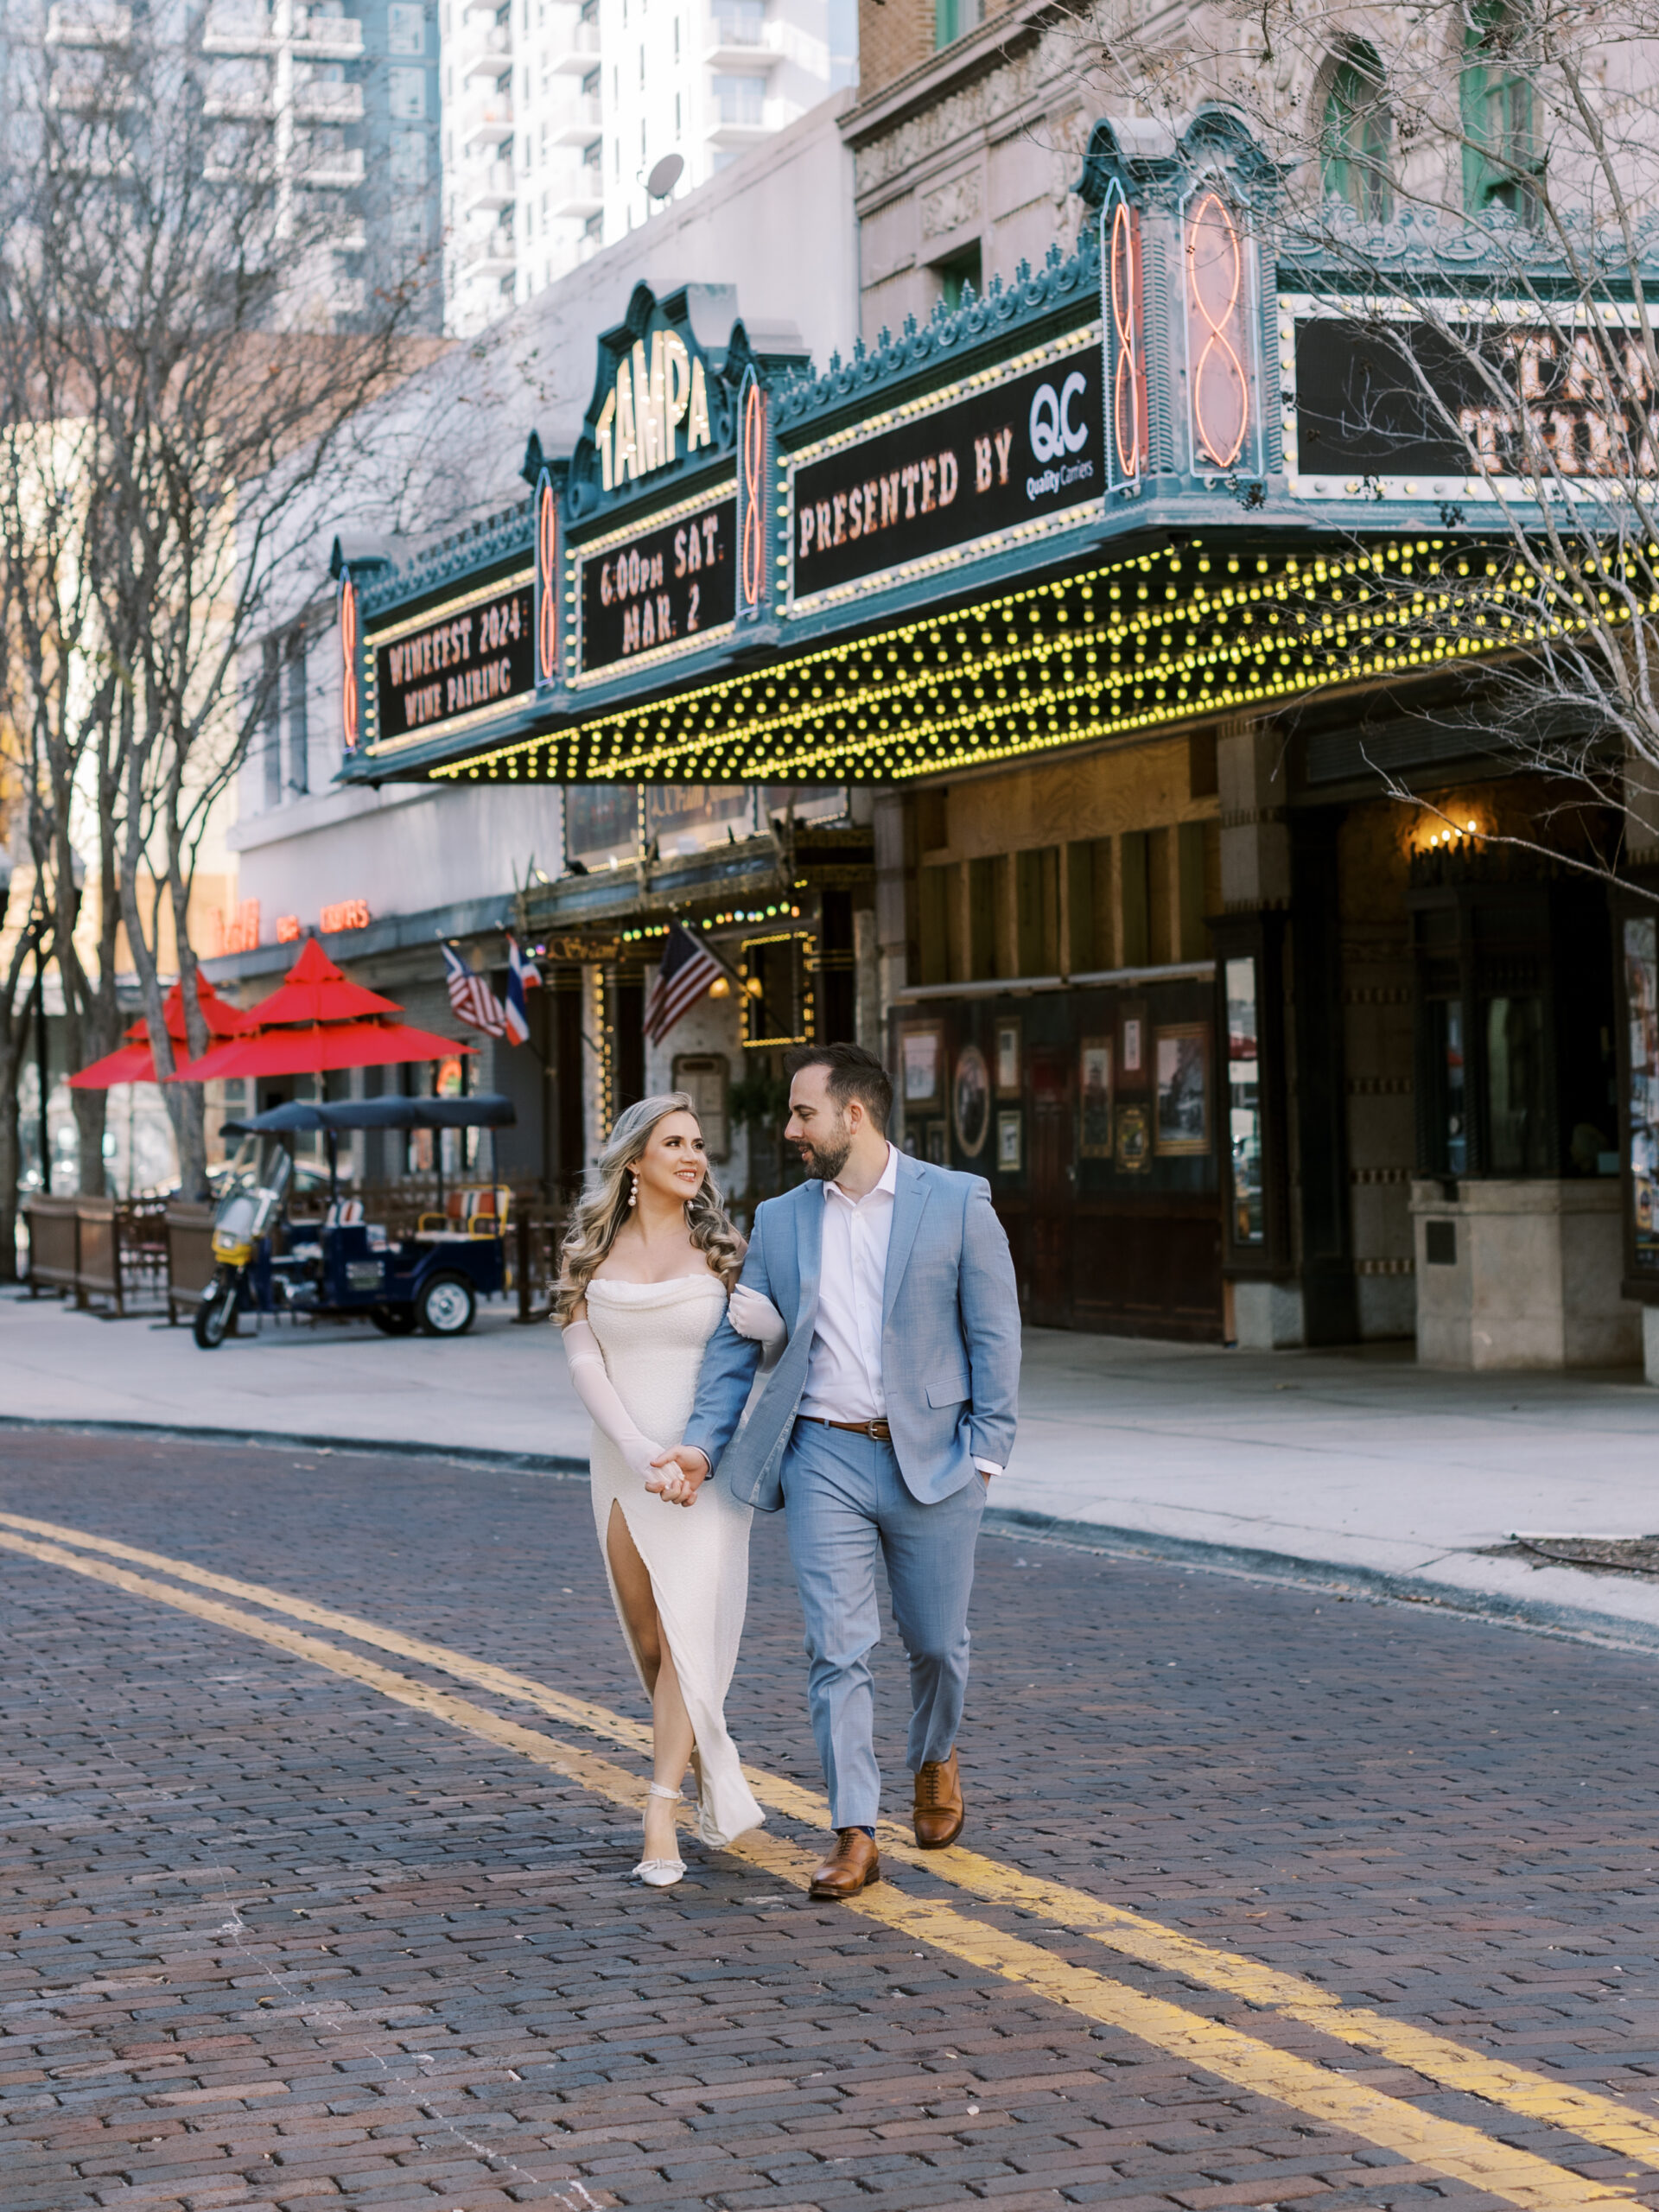 Couple leaving the Tampa Theatre in Downtown Tampa, wearing formal, stylish attire.